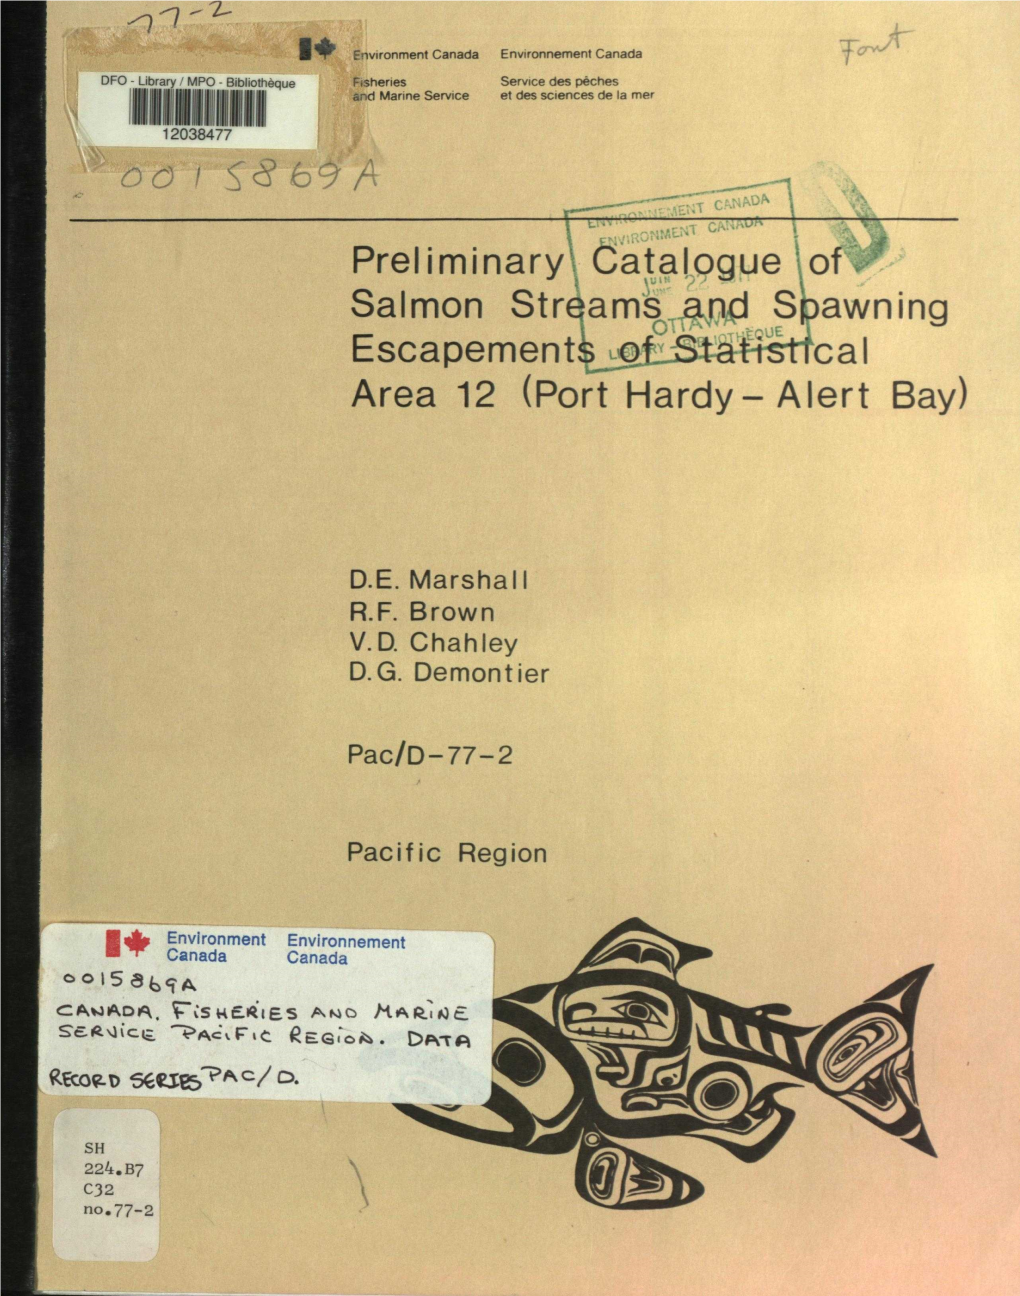 Preliminary Catalogue of Salmon Streams and Spawning Escapements of Statistical Area 12 (Port Hardy- Alert Bay)